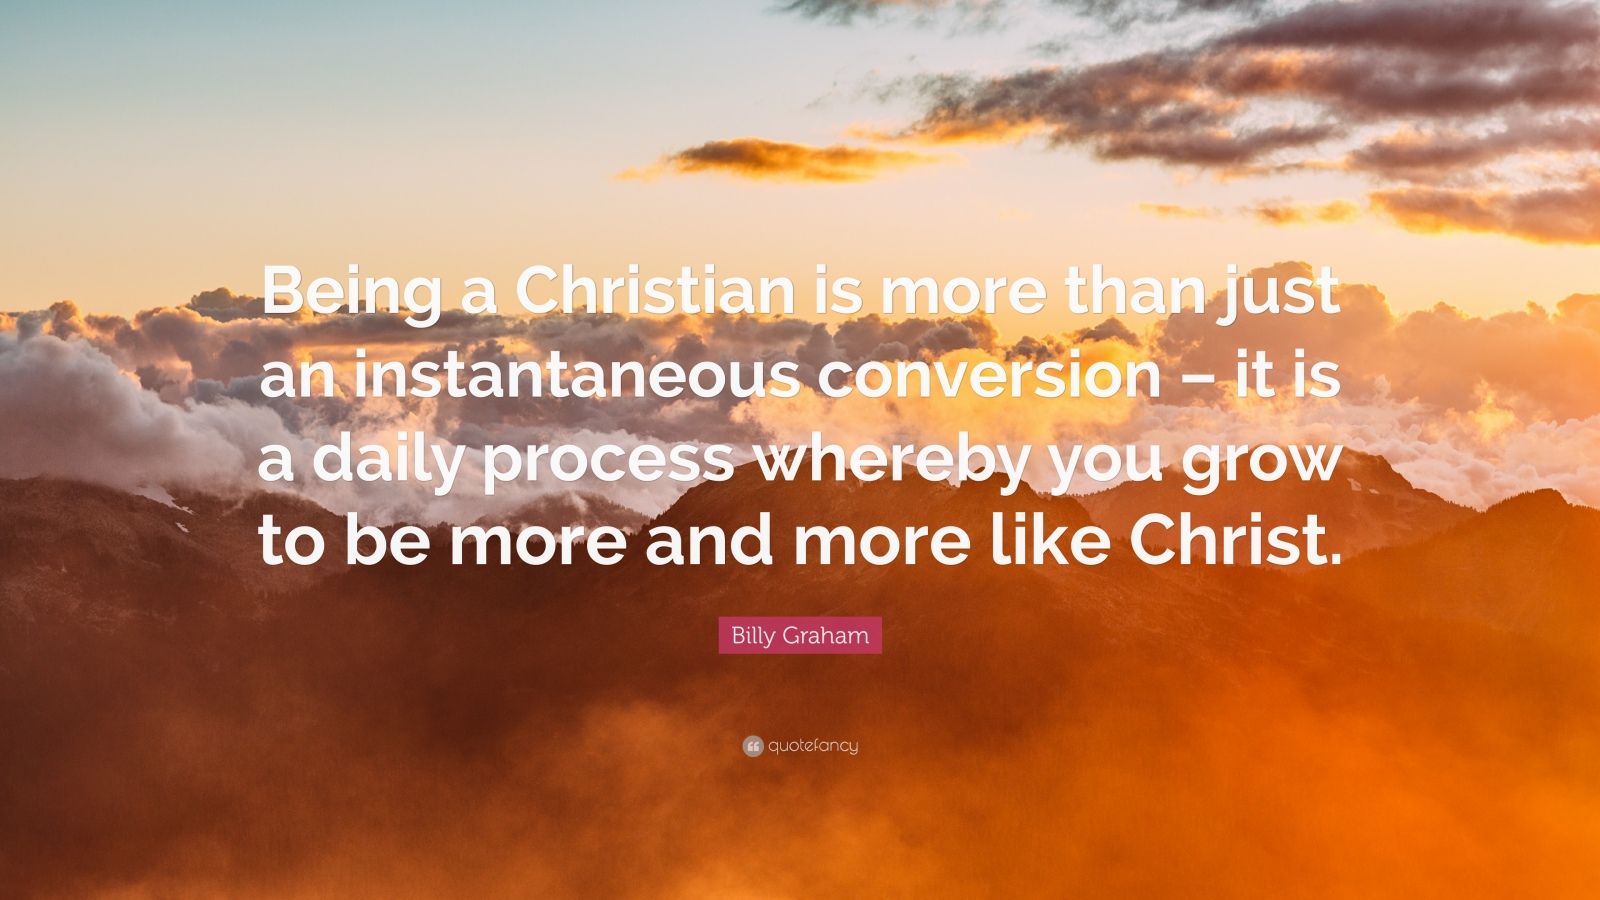 Billy Graham Quote: “Being a Christian is more than just an ...